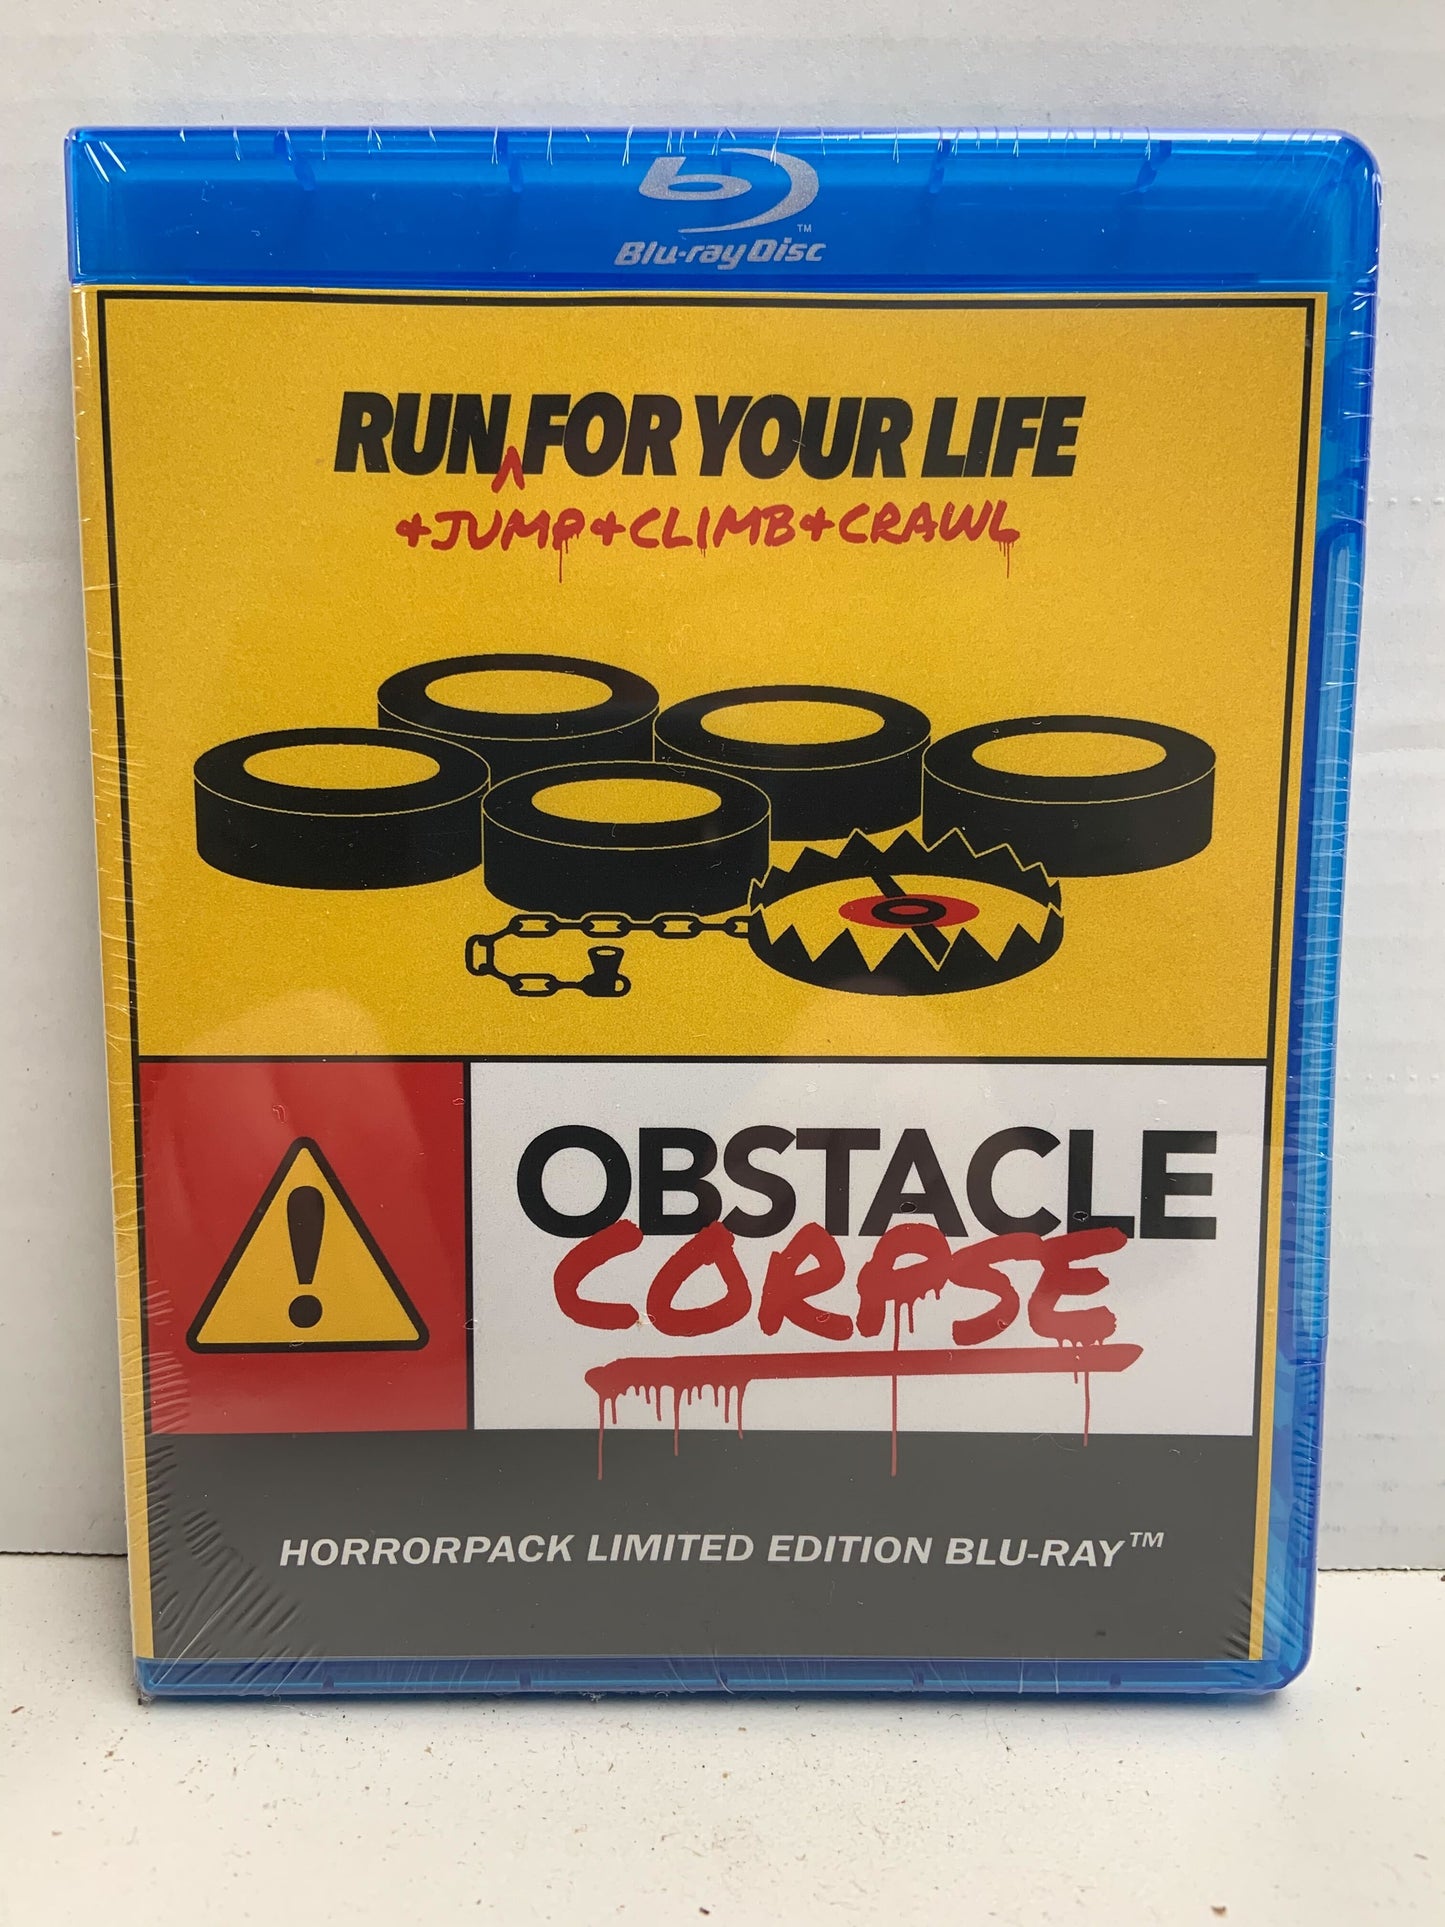 Obstacle Corpse - HorrorPack Limited Edition Blu-ray #88